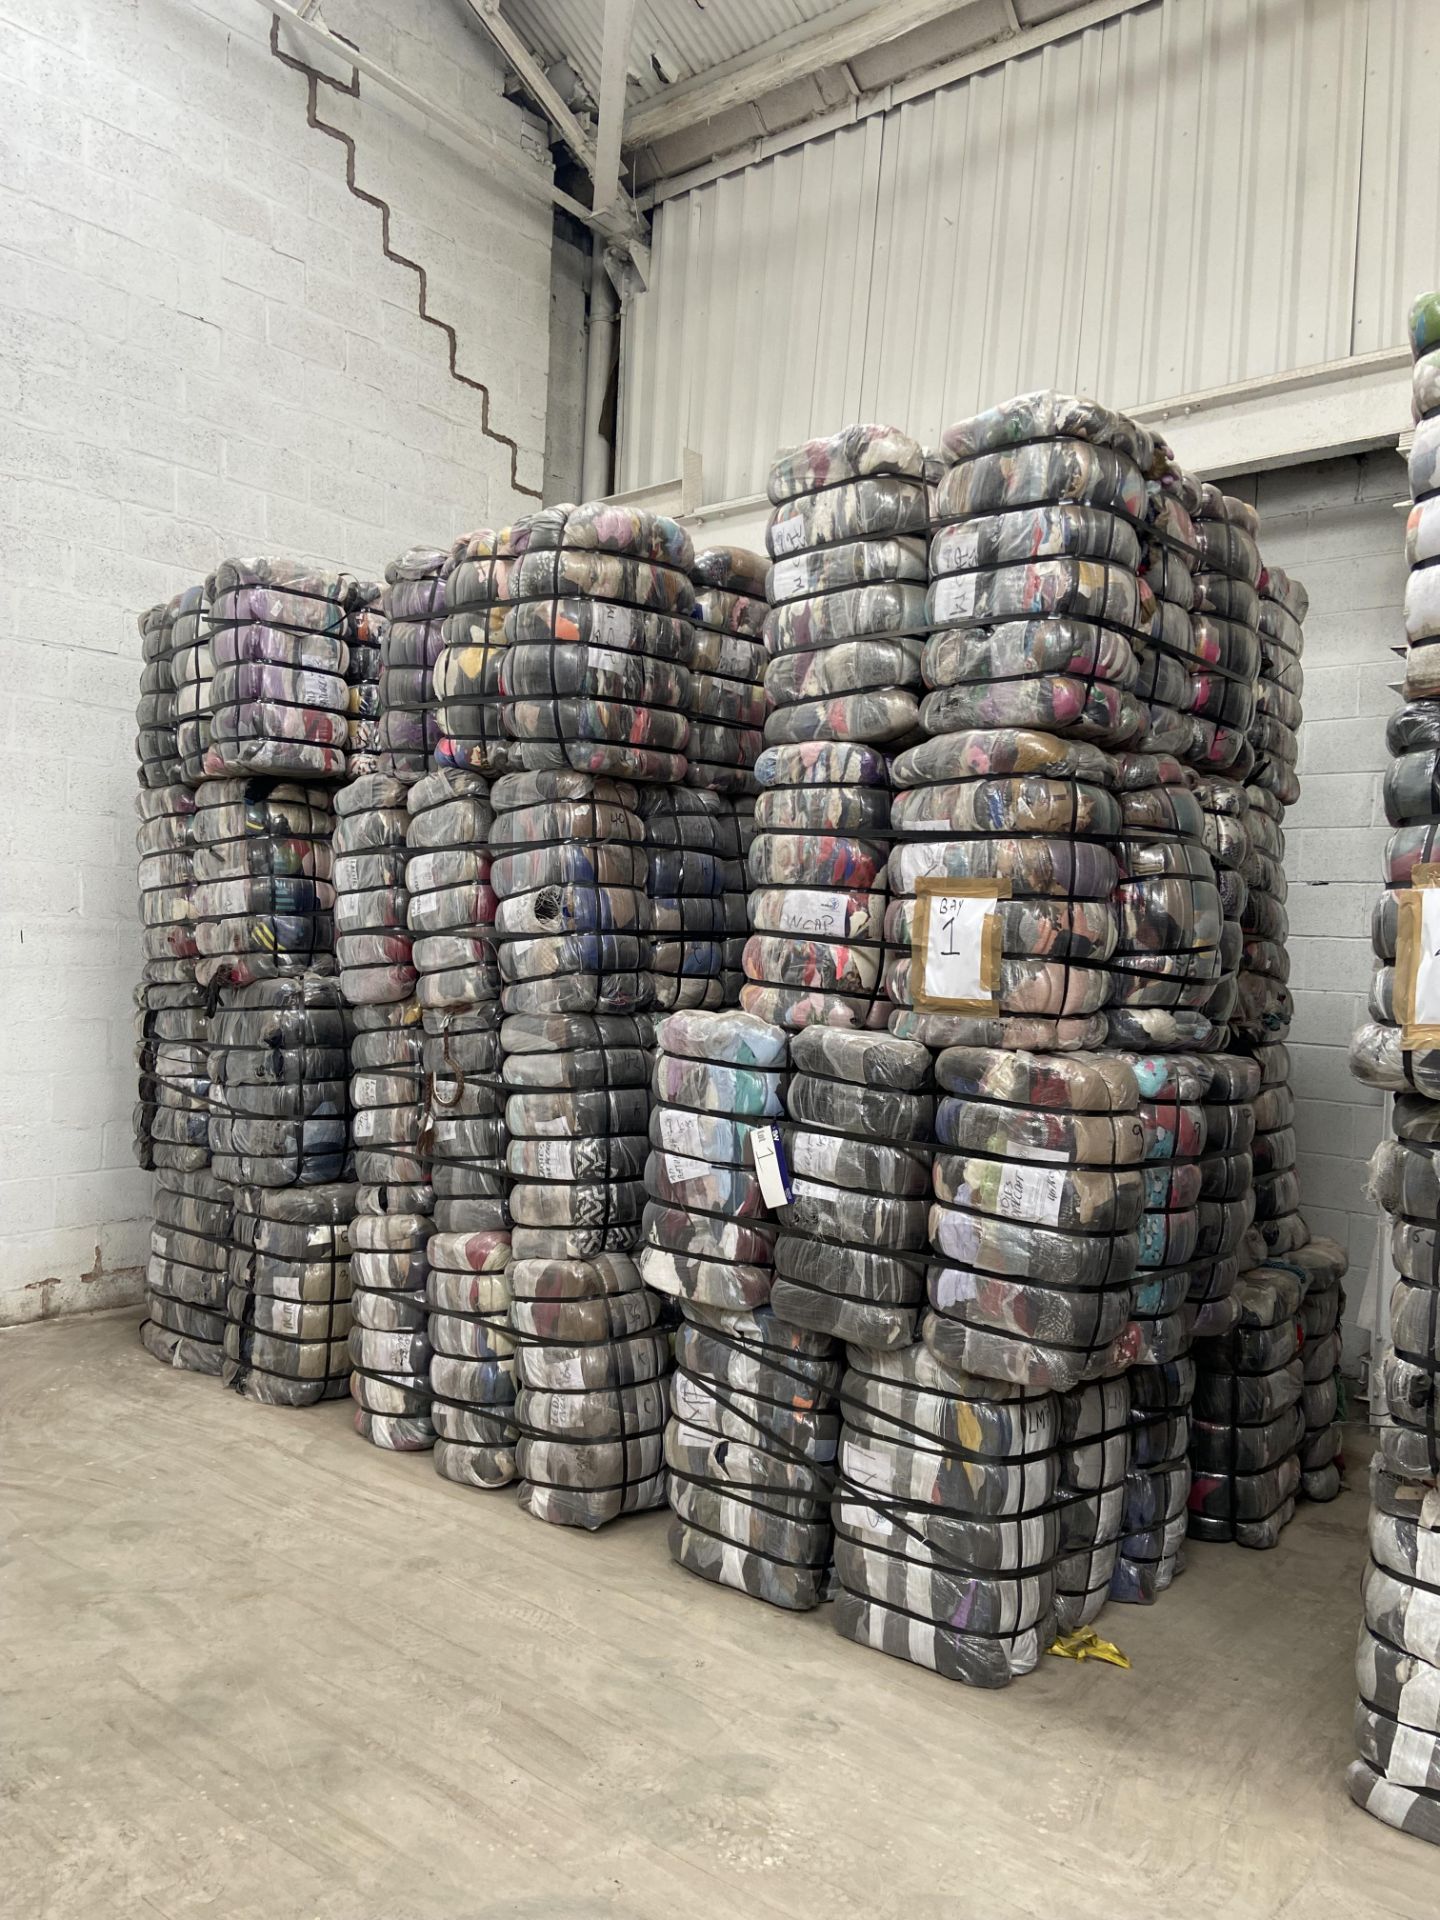 APPROX 197 BALES (8865KG) RECYCLABLE WASTE TEXTILES, understood to comprise: Six bales x 45kg Mens